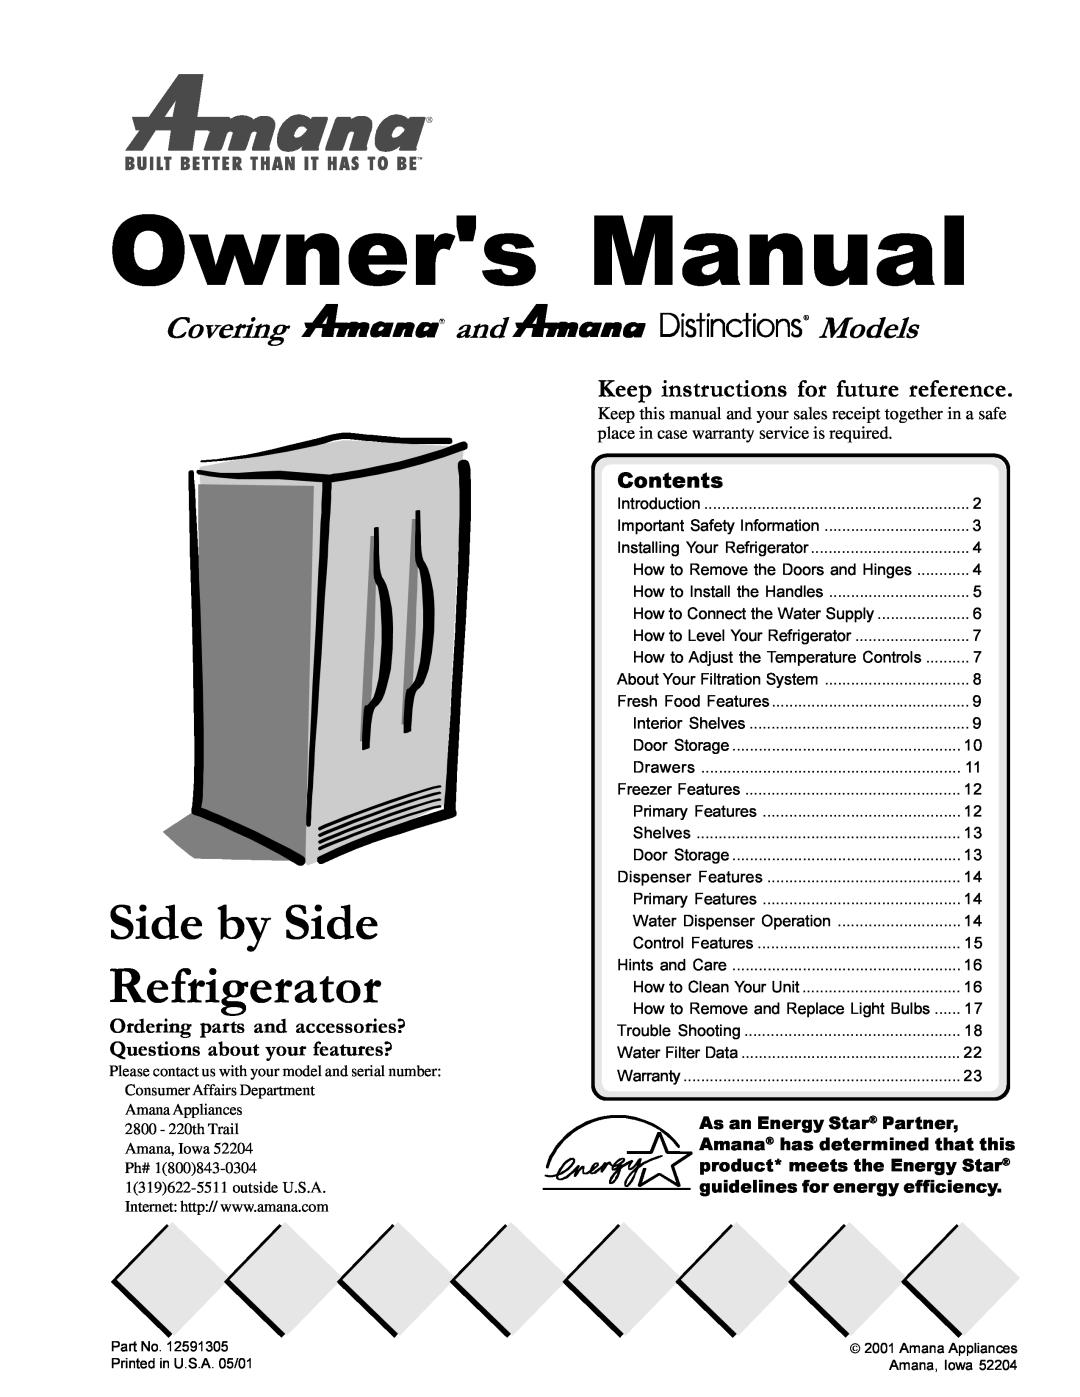 Amana DRSE663BW, DRSE663BC manual Covering and Models, Keep instructions for future reference, Owners Manual, Contents 